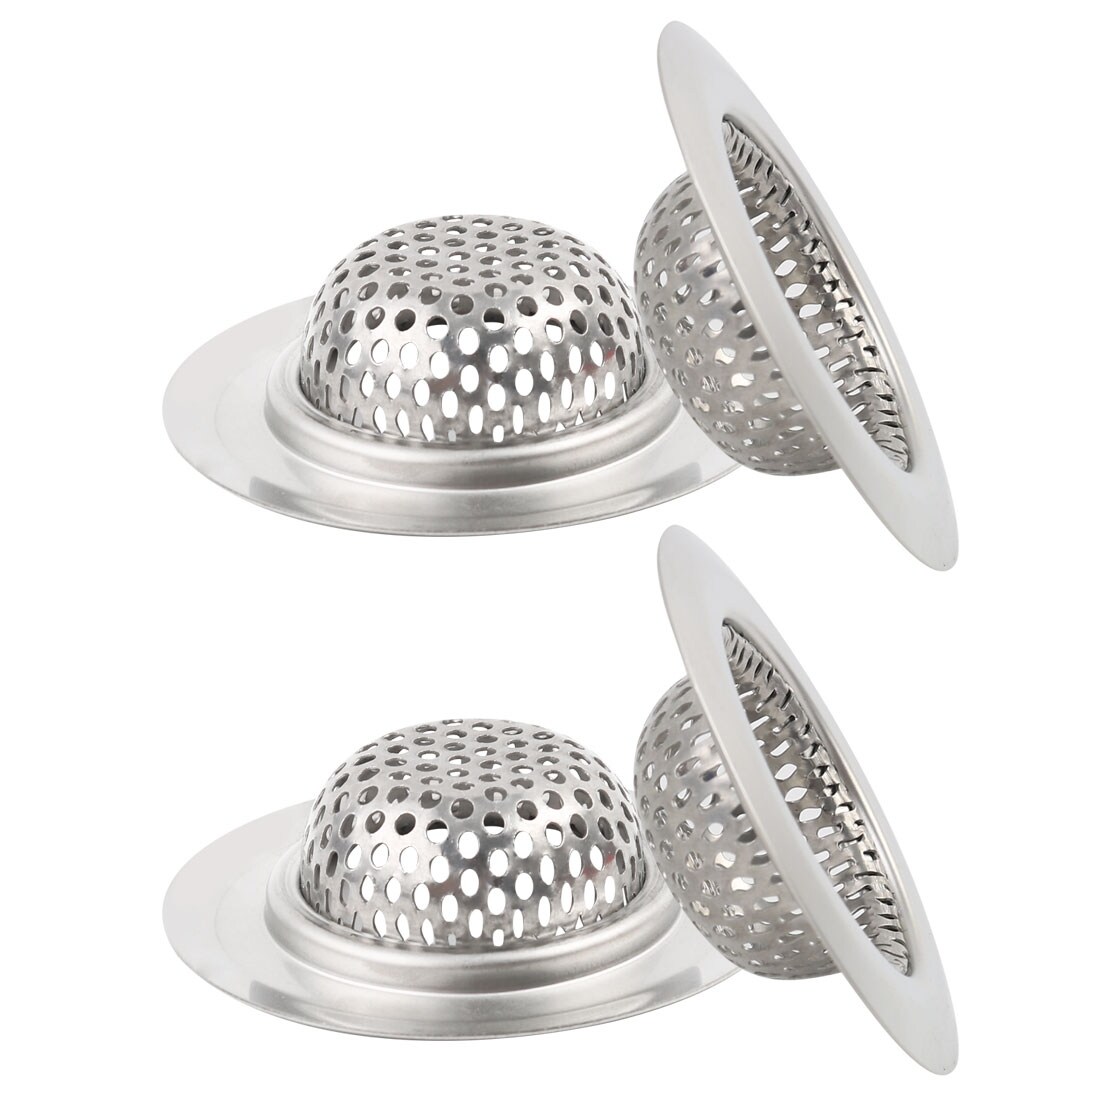 https://ak1.ostkcdn.com/images/products/is/images/direct/d84efaedda243539131bcf5e8f794c3bb27dd876/4pcs-Kitchen-Sink-Drain-Strainer-Stainless-Steel-Anti-blocking-Mesh-Drain-Stopper-with-Rim-2.2-Inch-Bathroom-Silver-Tone.jpg